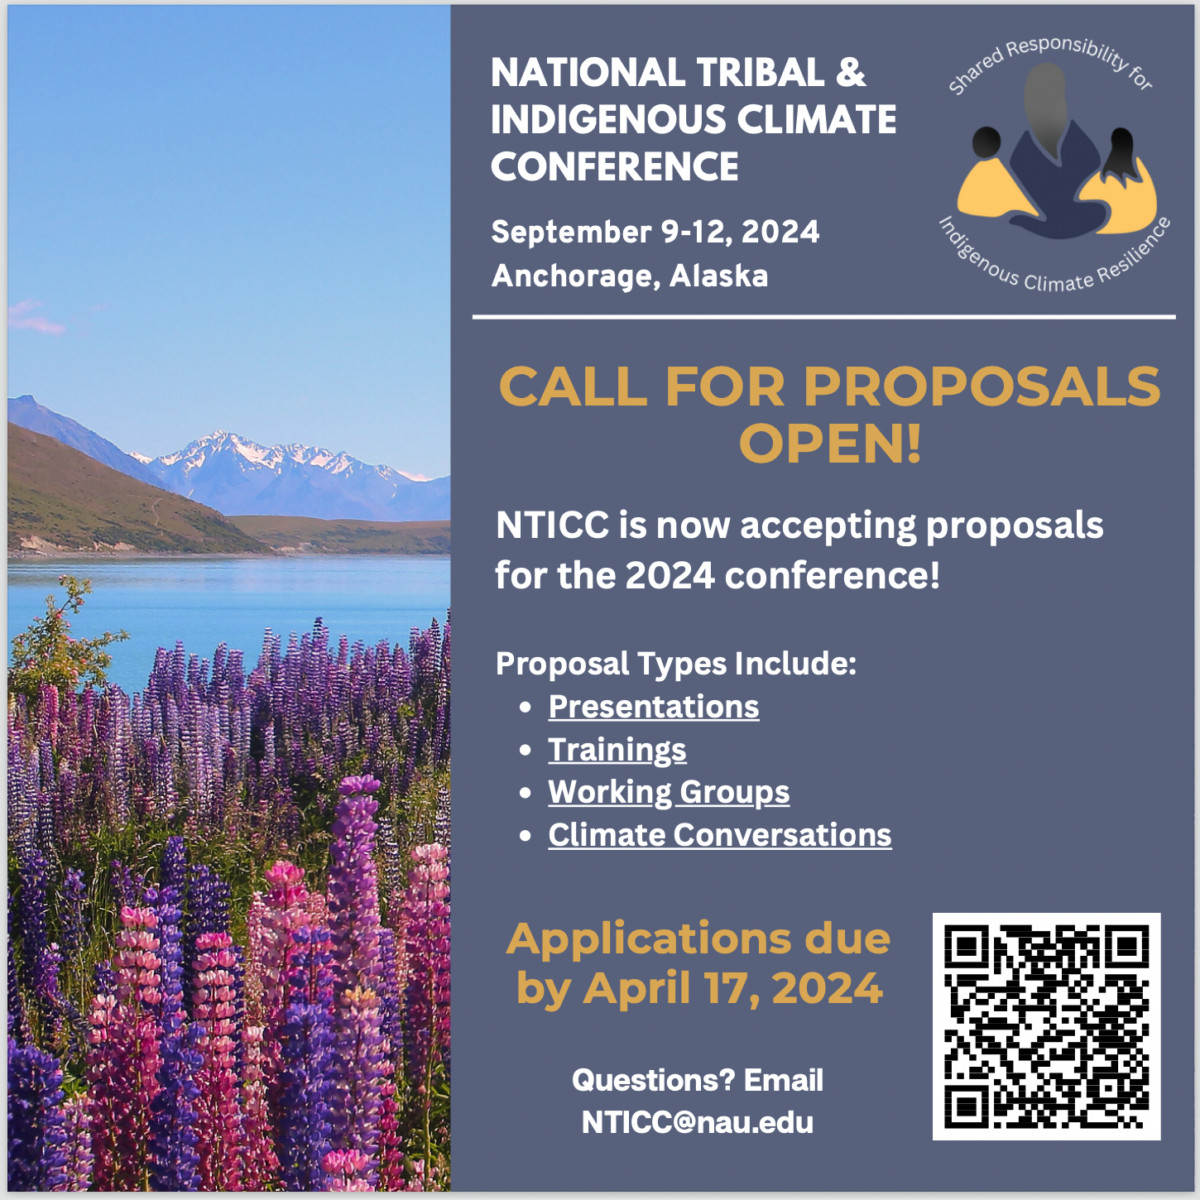 US National Tribal and Indigenous Climate Conference, Anchorage AK